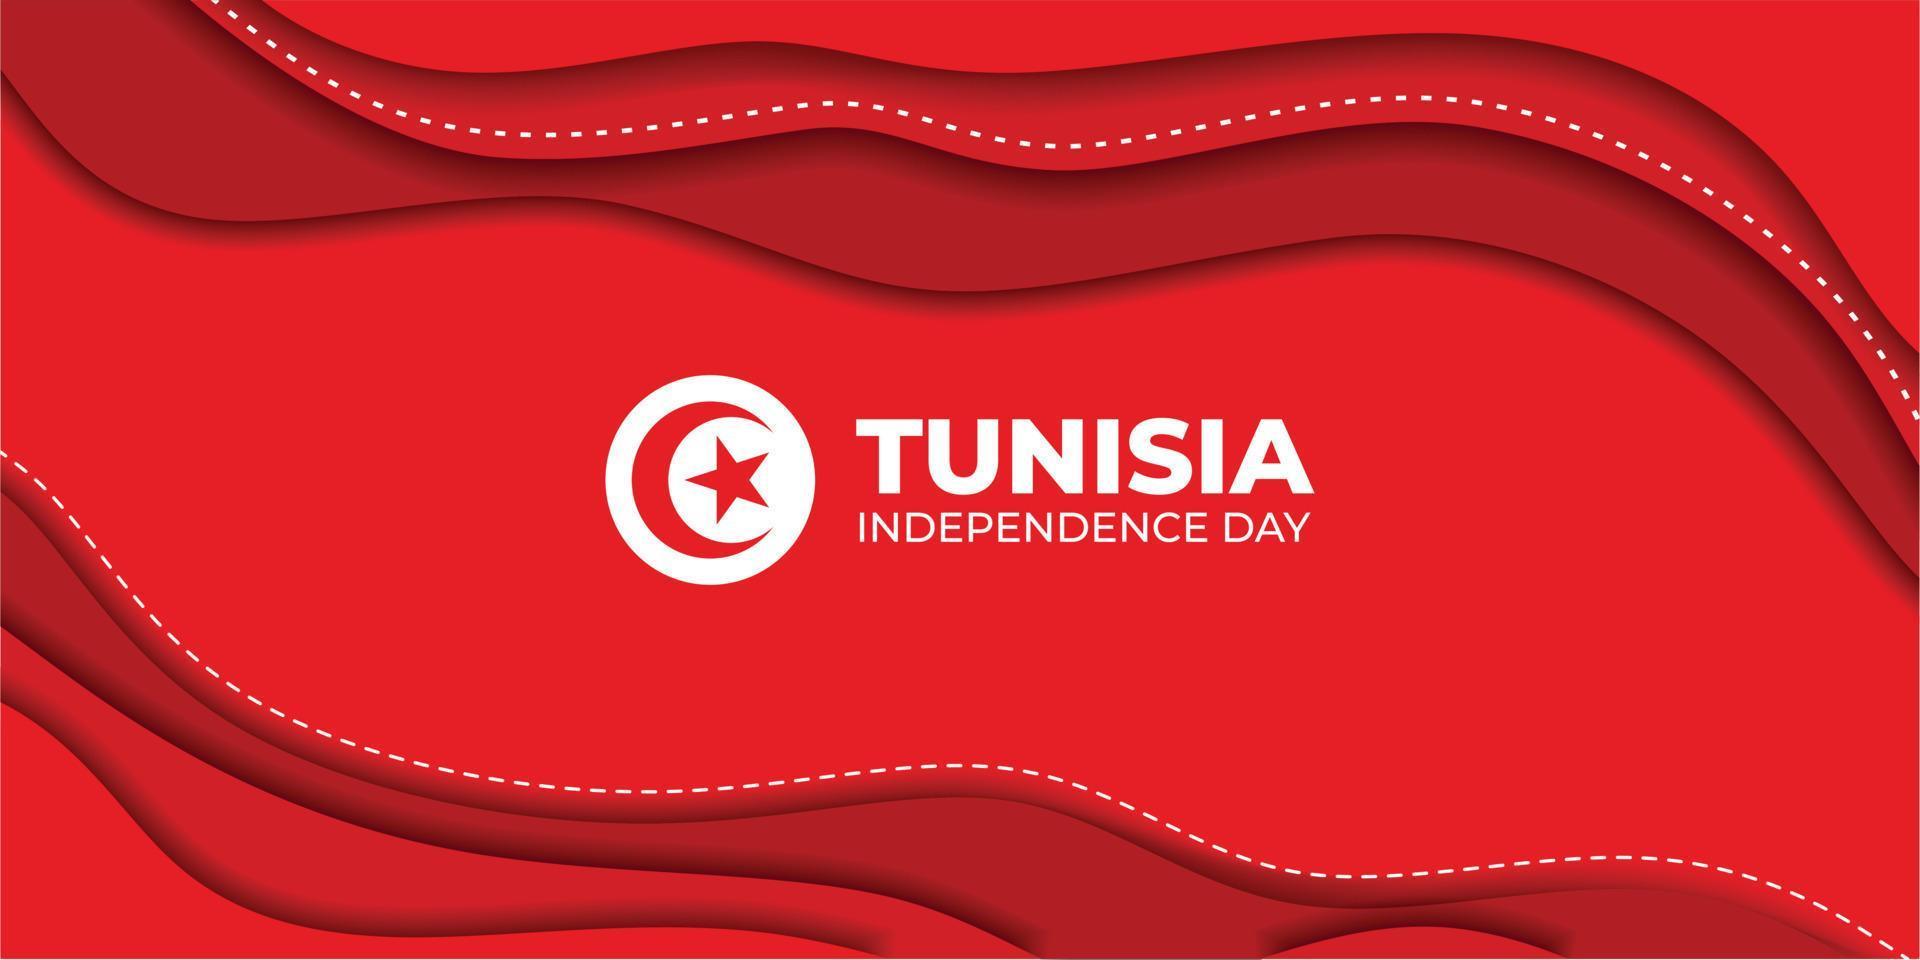 Tunisia Independence day vector illustration. Red Abstract background.